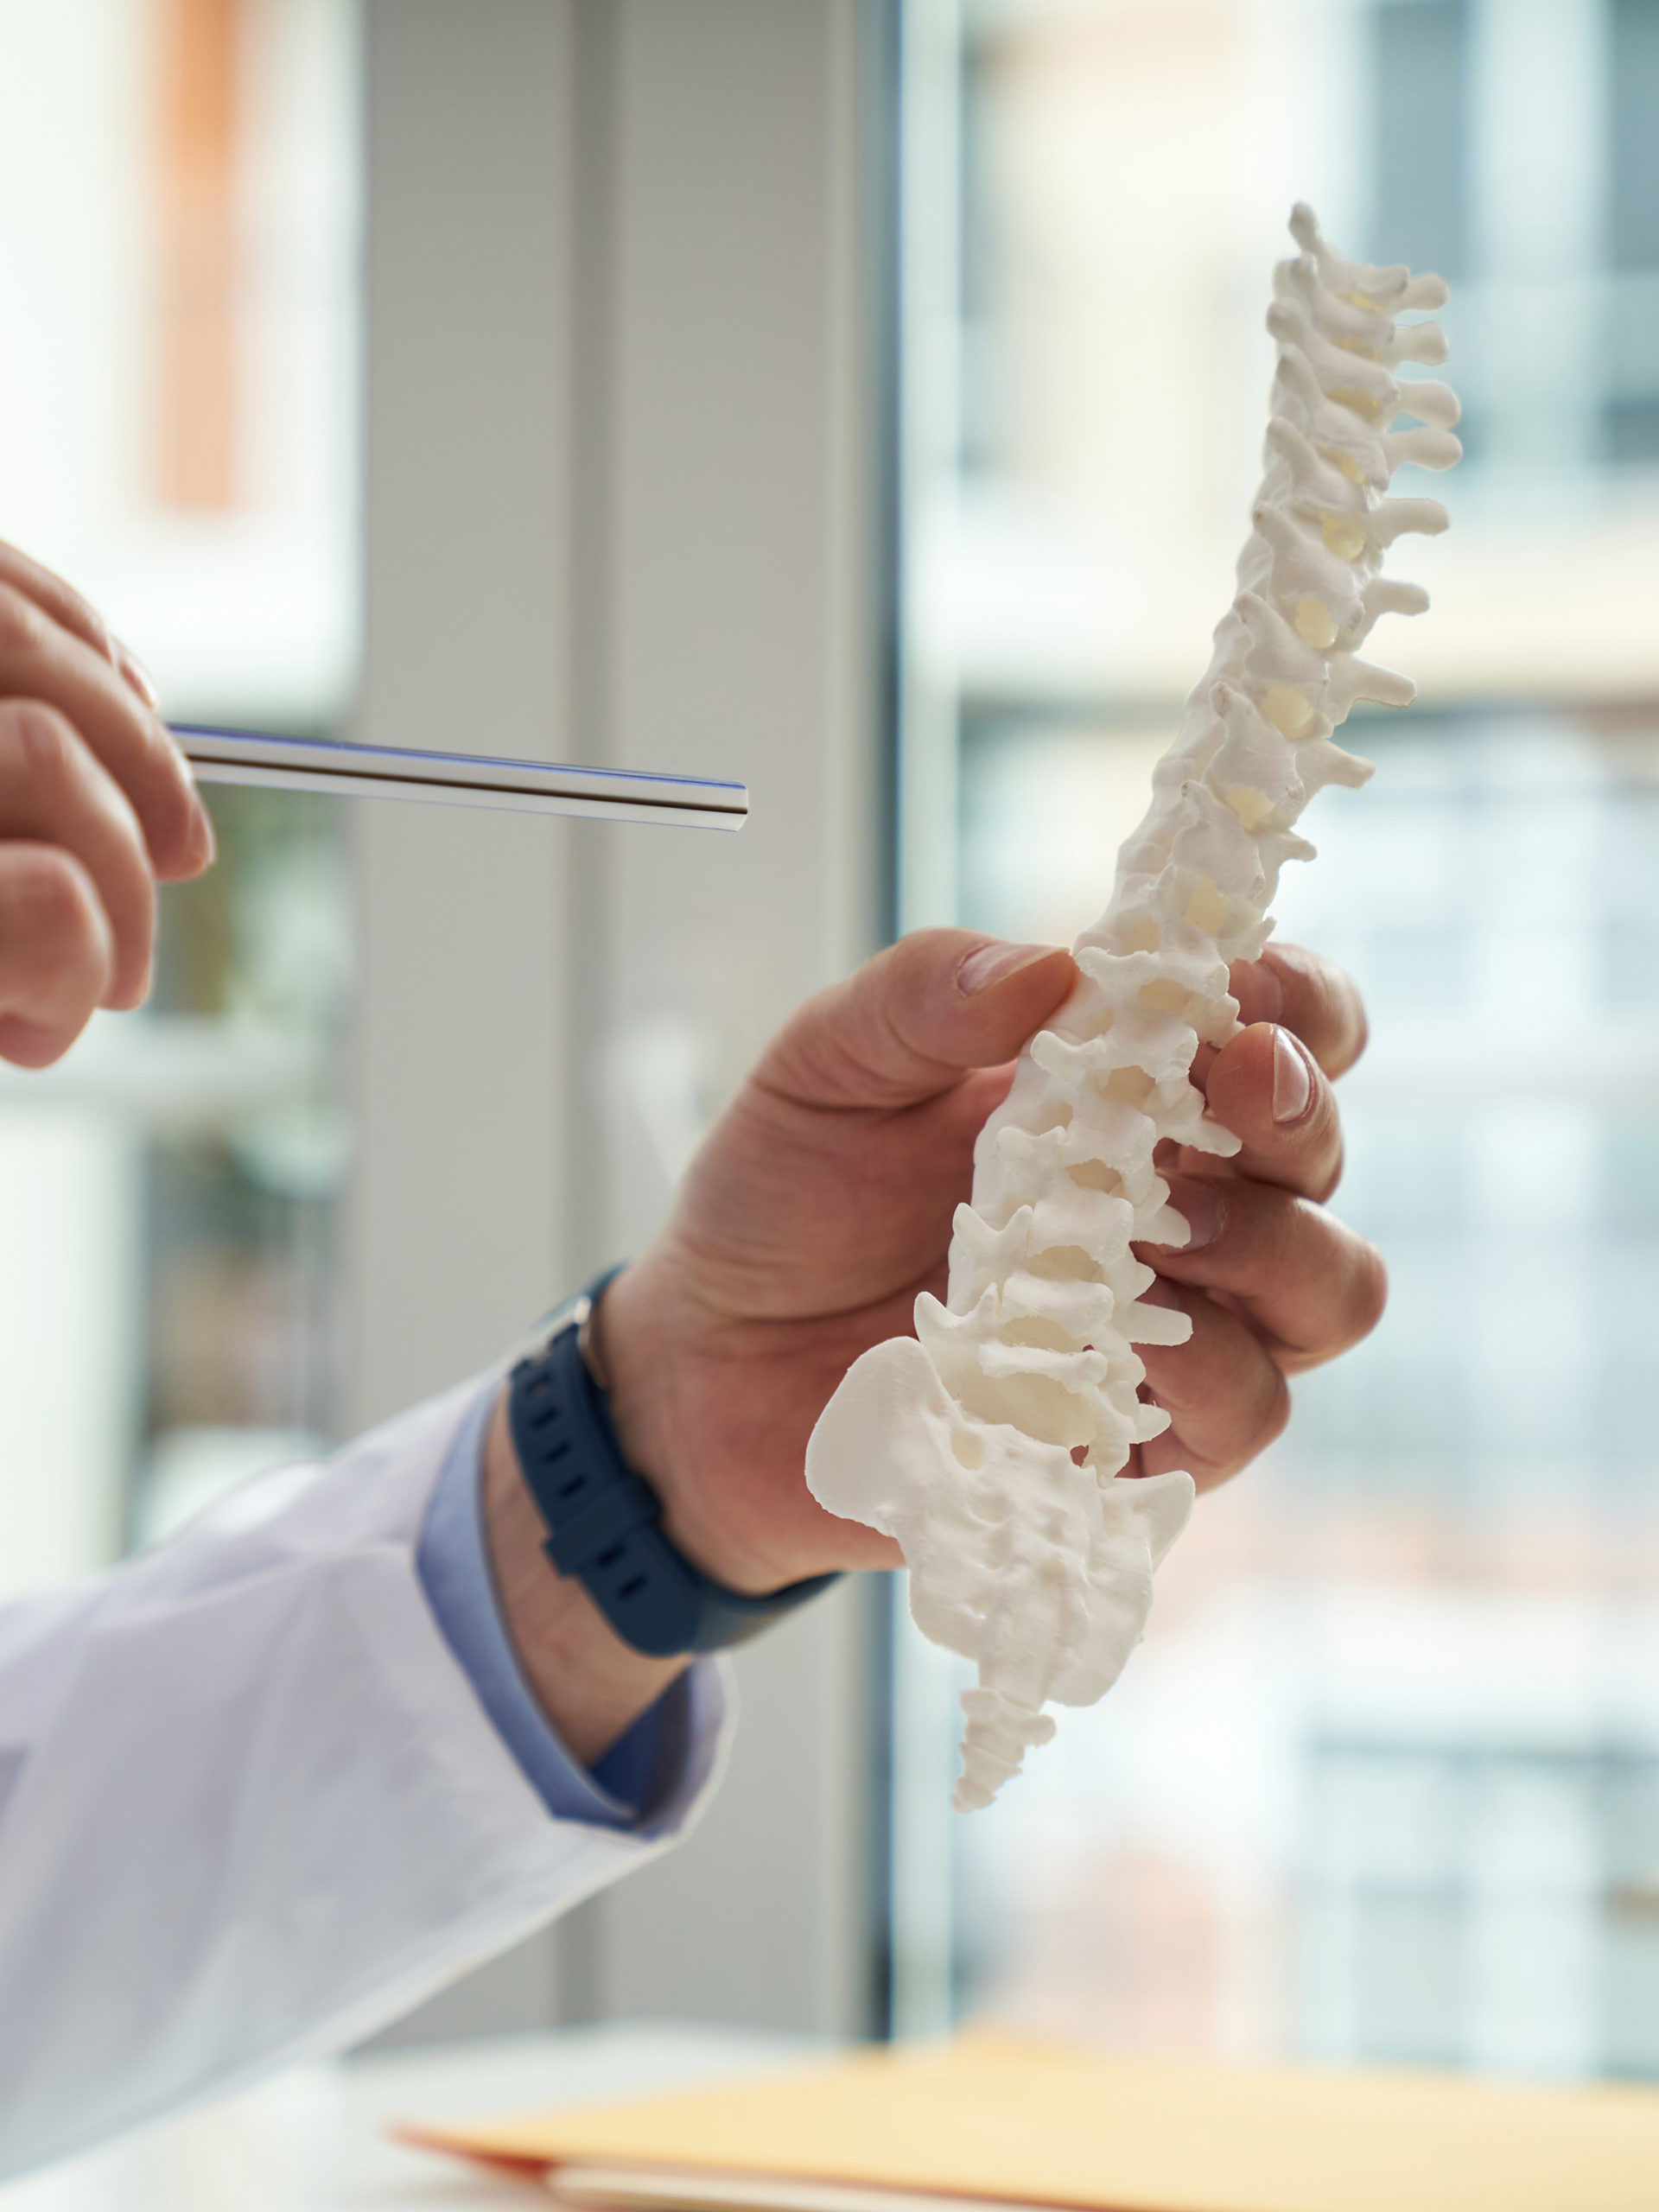 Healthcare worker holding a model of a human spine pointing to one of its segments